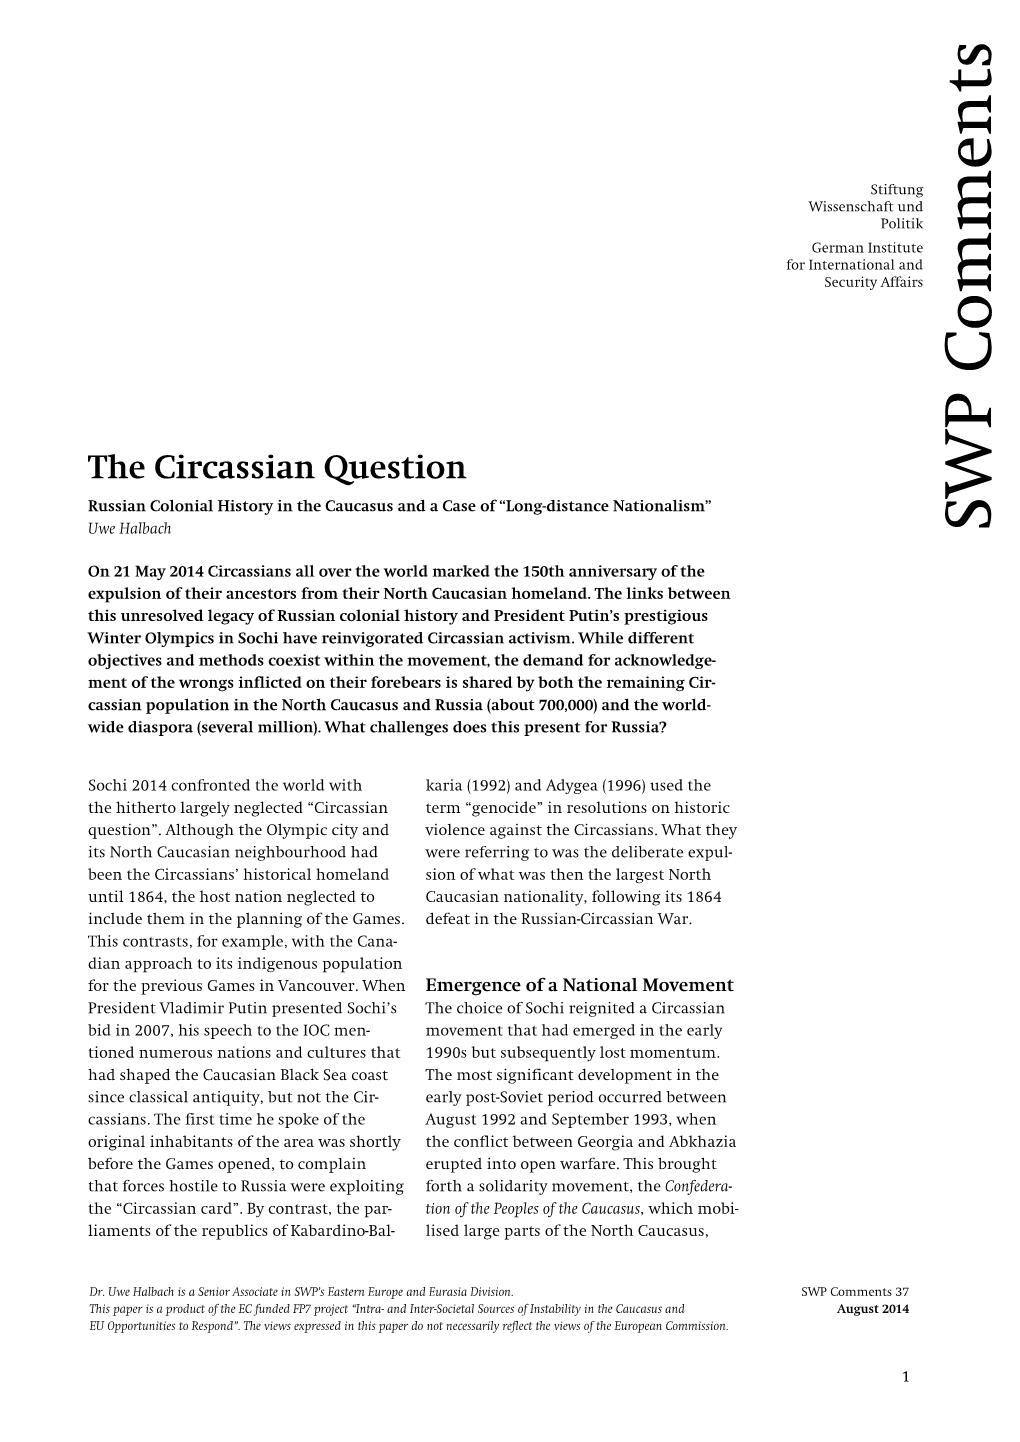 The Circassian Question WP Russian Colonial History in the Caucasus and a Case of “Long-Distance Nationalism”